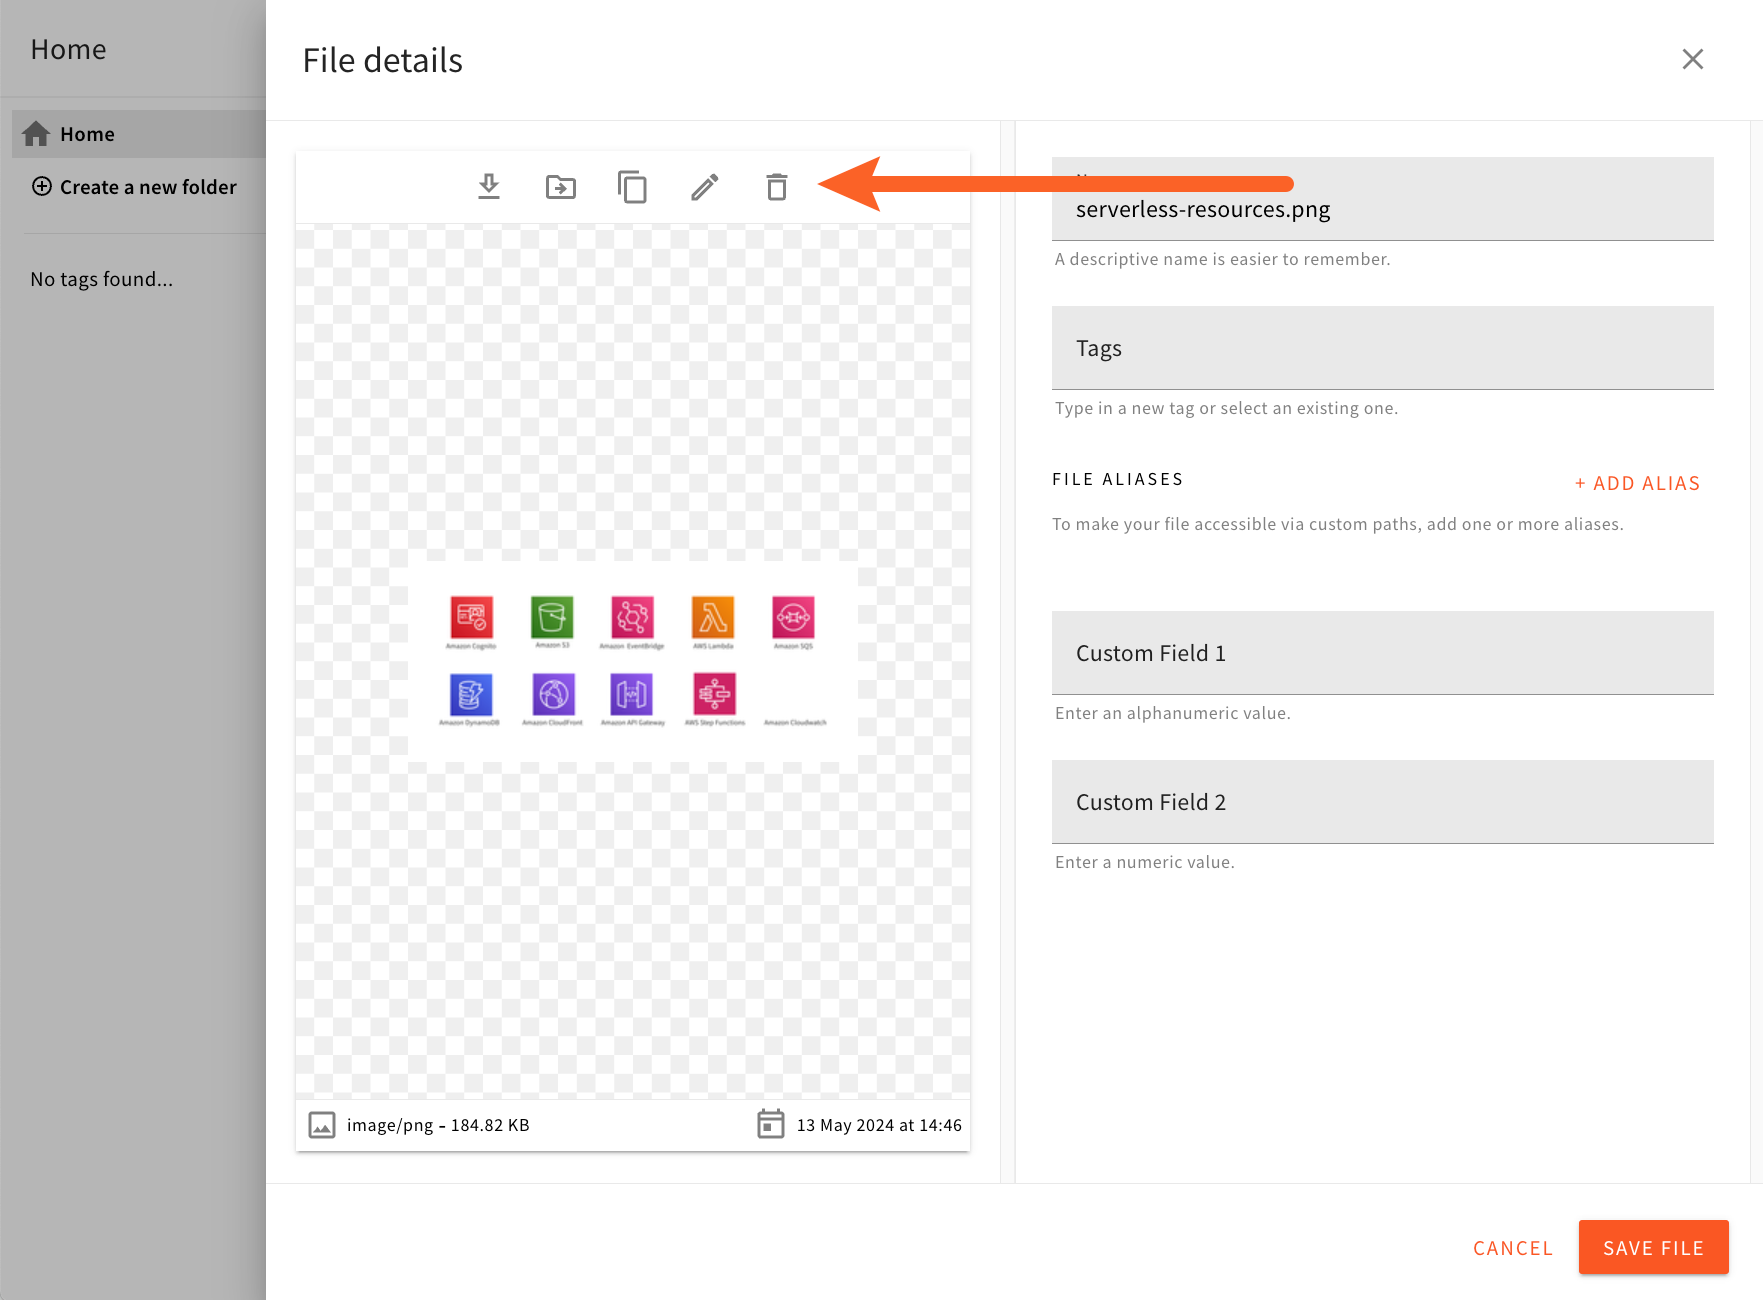 File Actions In File Details Panel